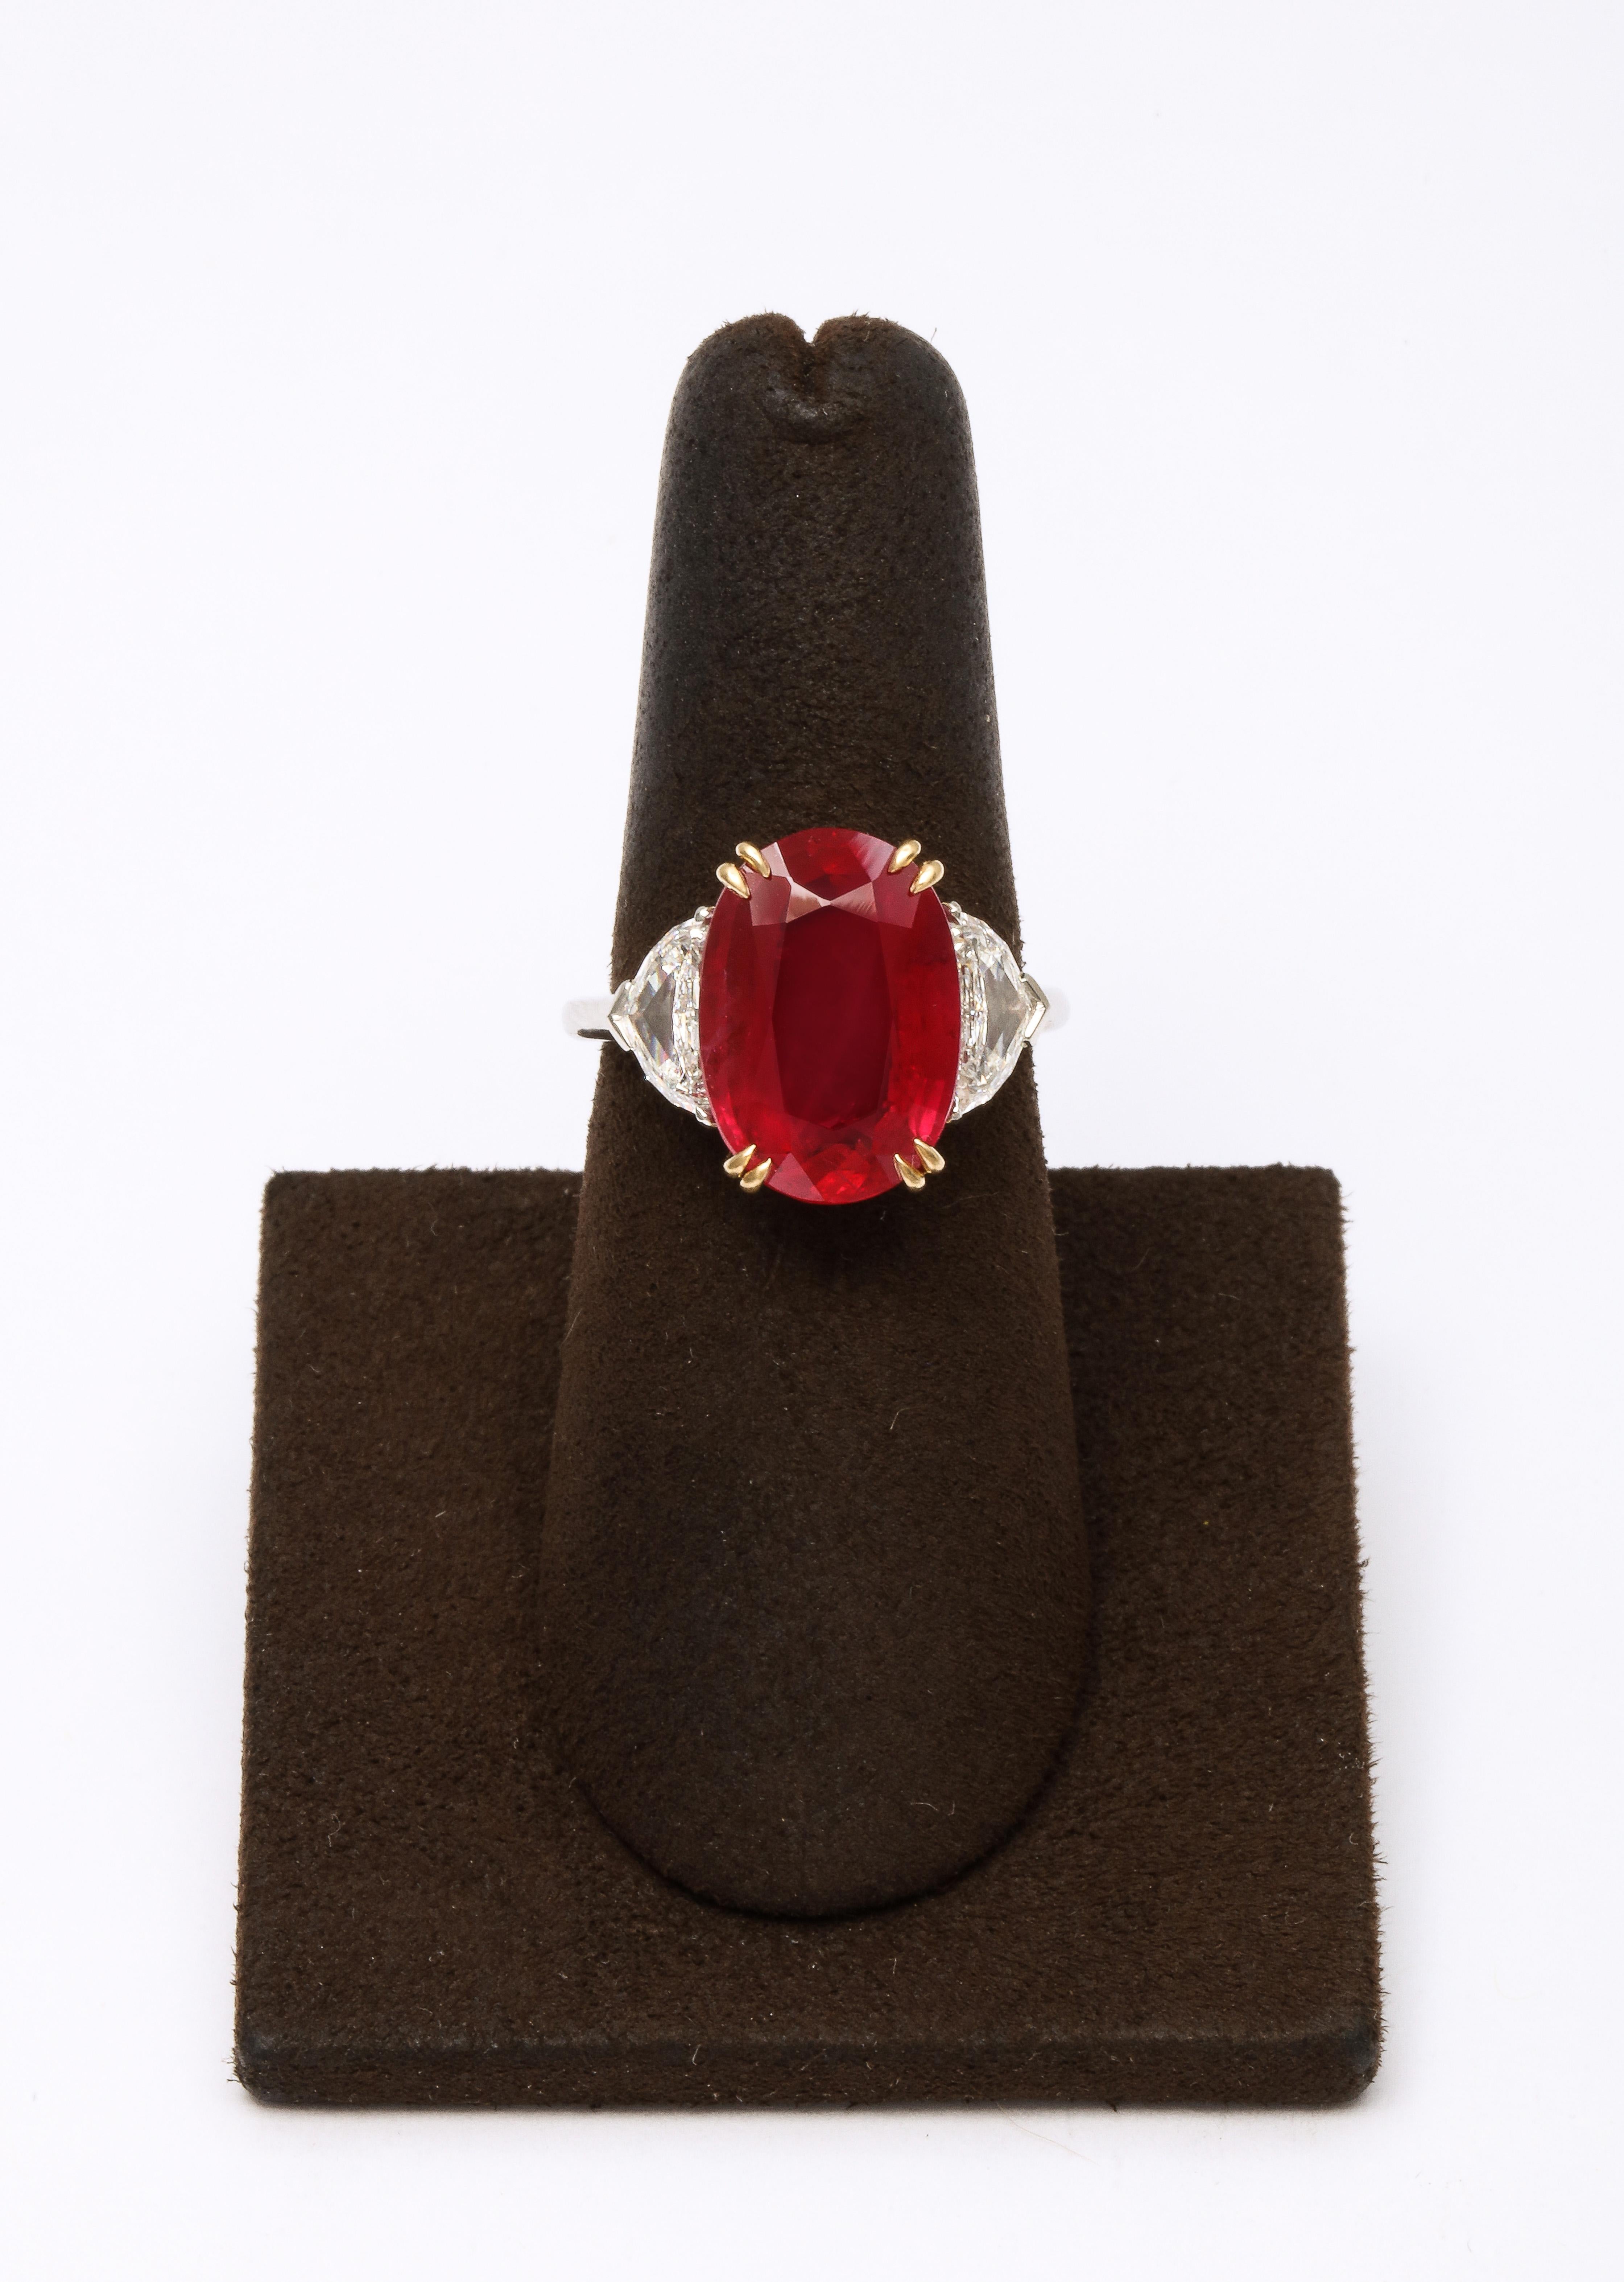 
A beautiful ring featuring a vibrant 7.63 carat Certified Fine Thai Ruby. 

Set in a handmade platinum and 18k yellow gold mounting with 1.02 carats of colorless white side diamonds.  

Size 6.25, this ring can be resized. 